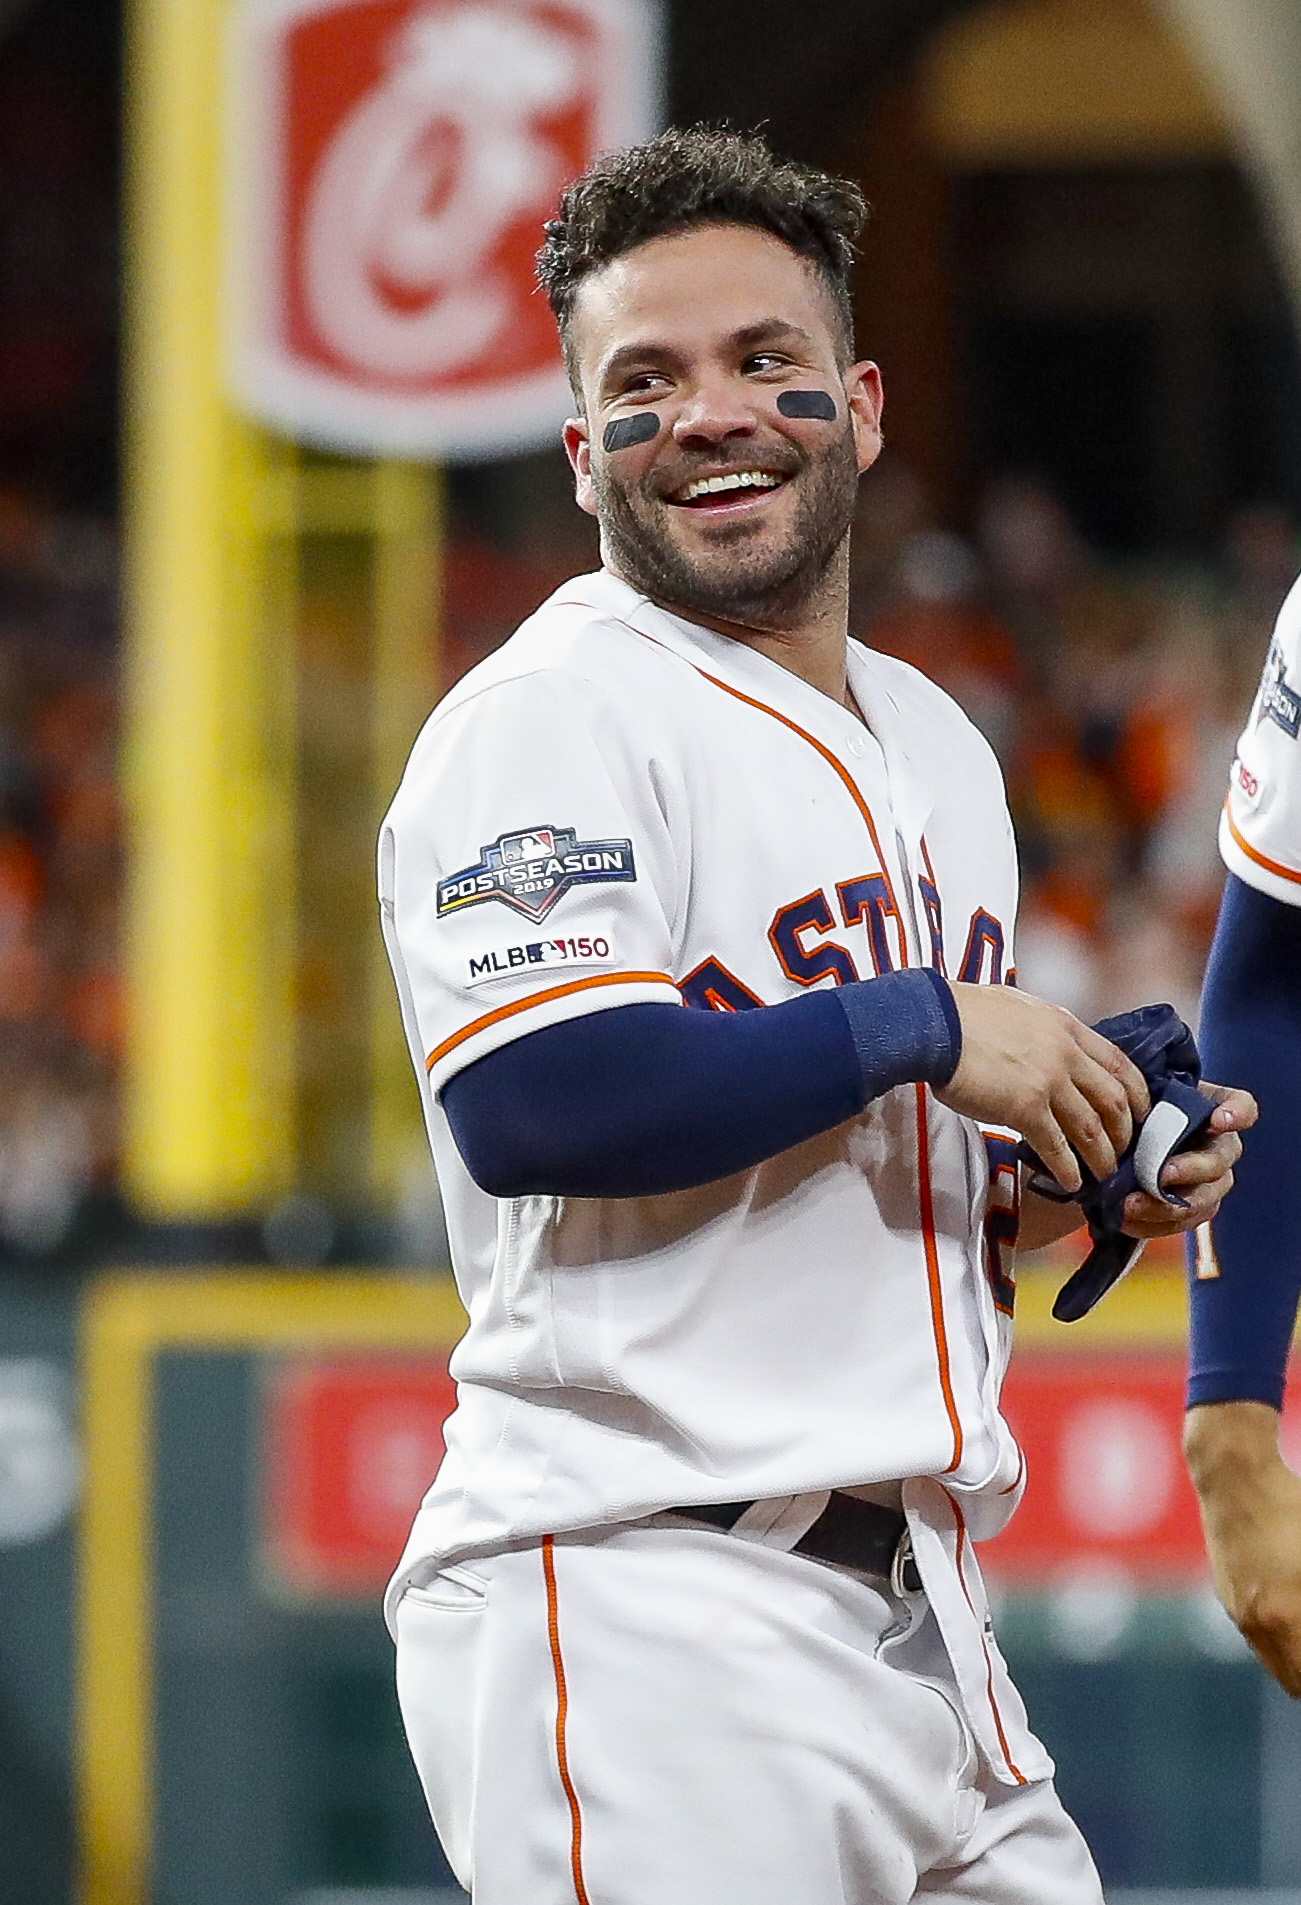 'Lead the way. Be a role model': José Altuve wrote inspiring letter